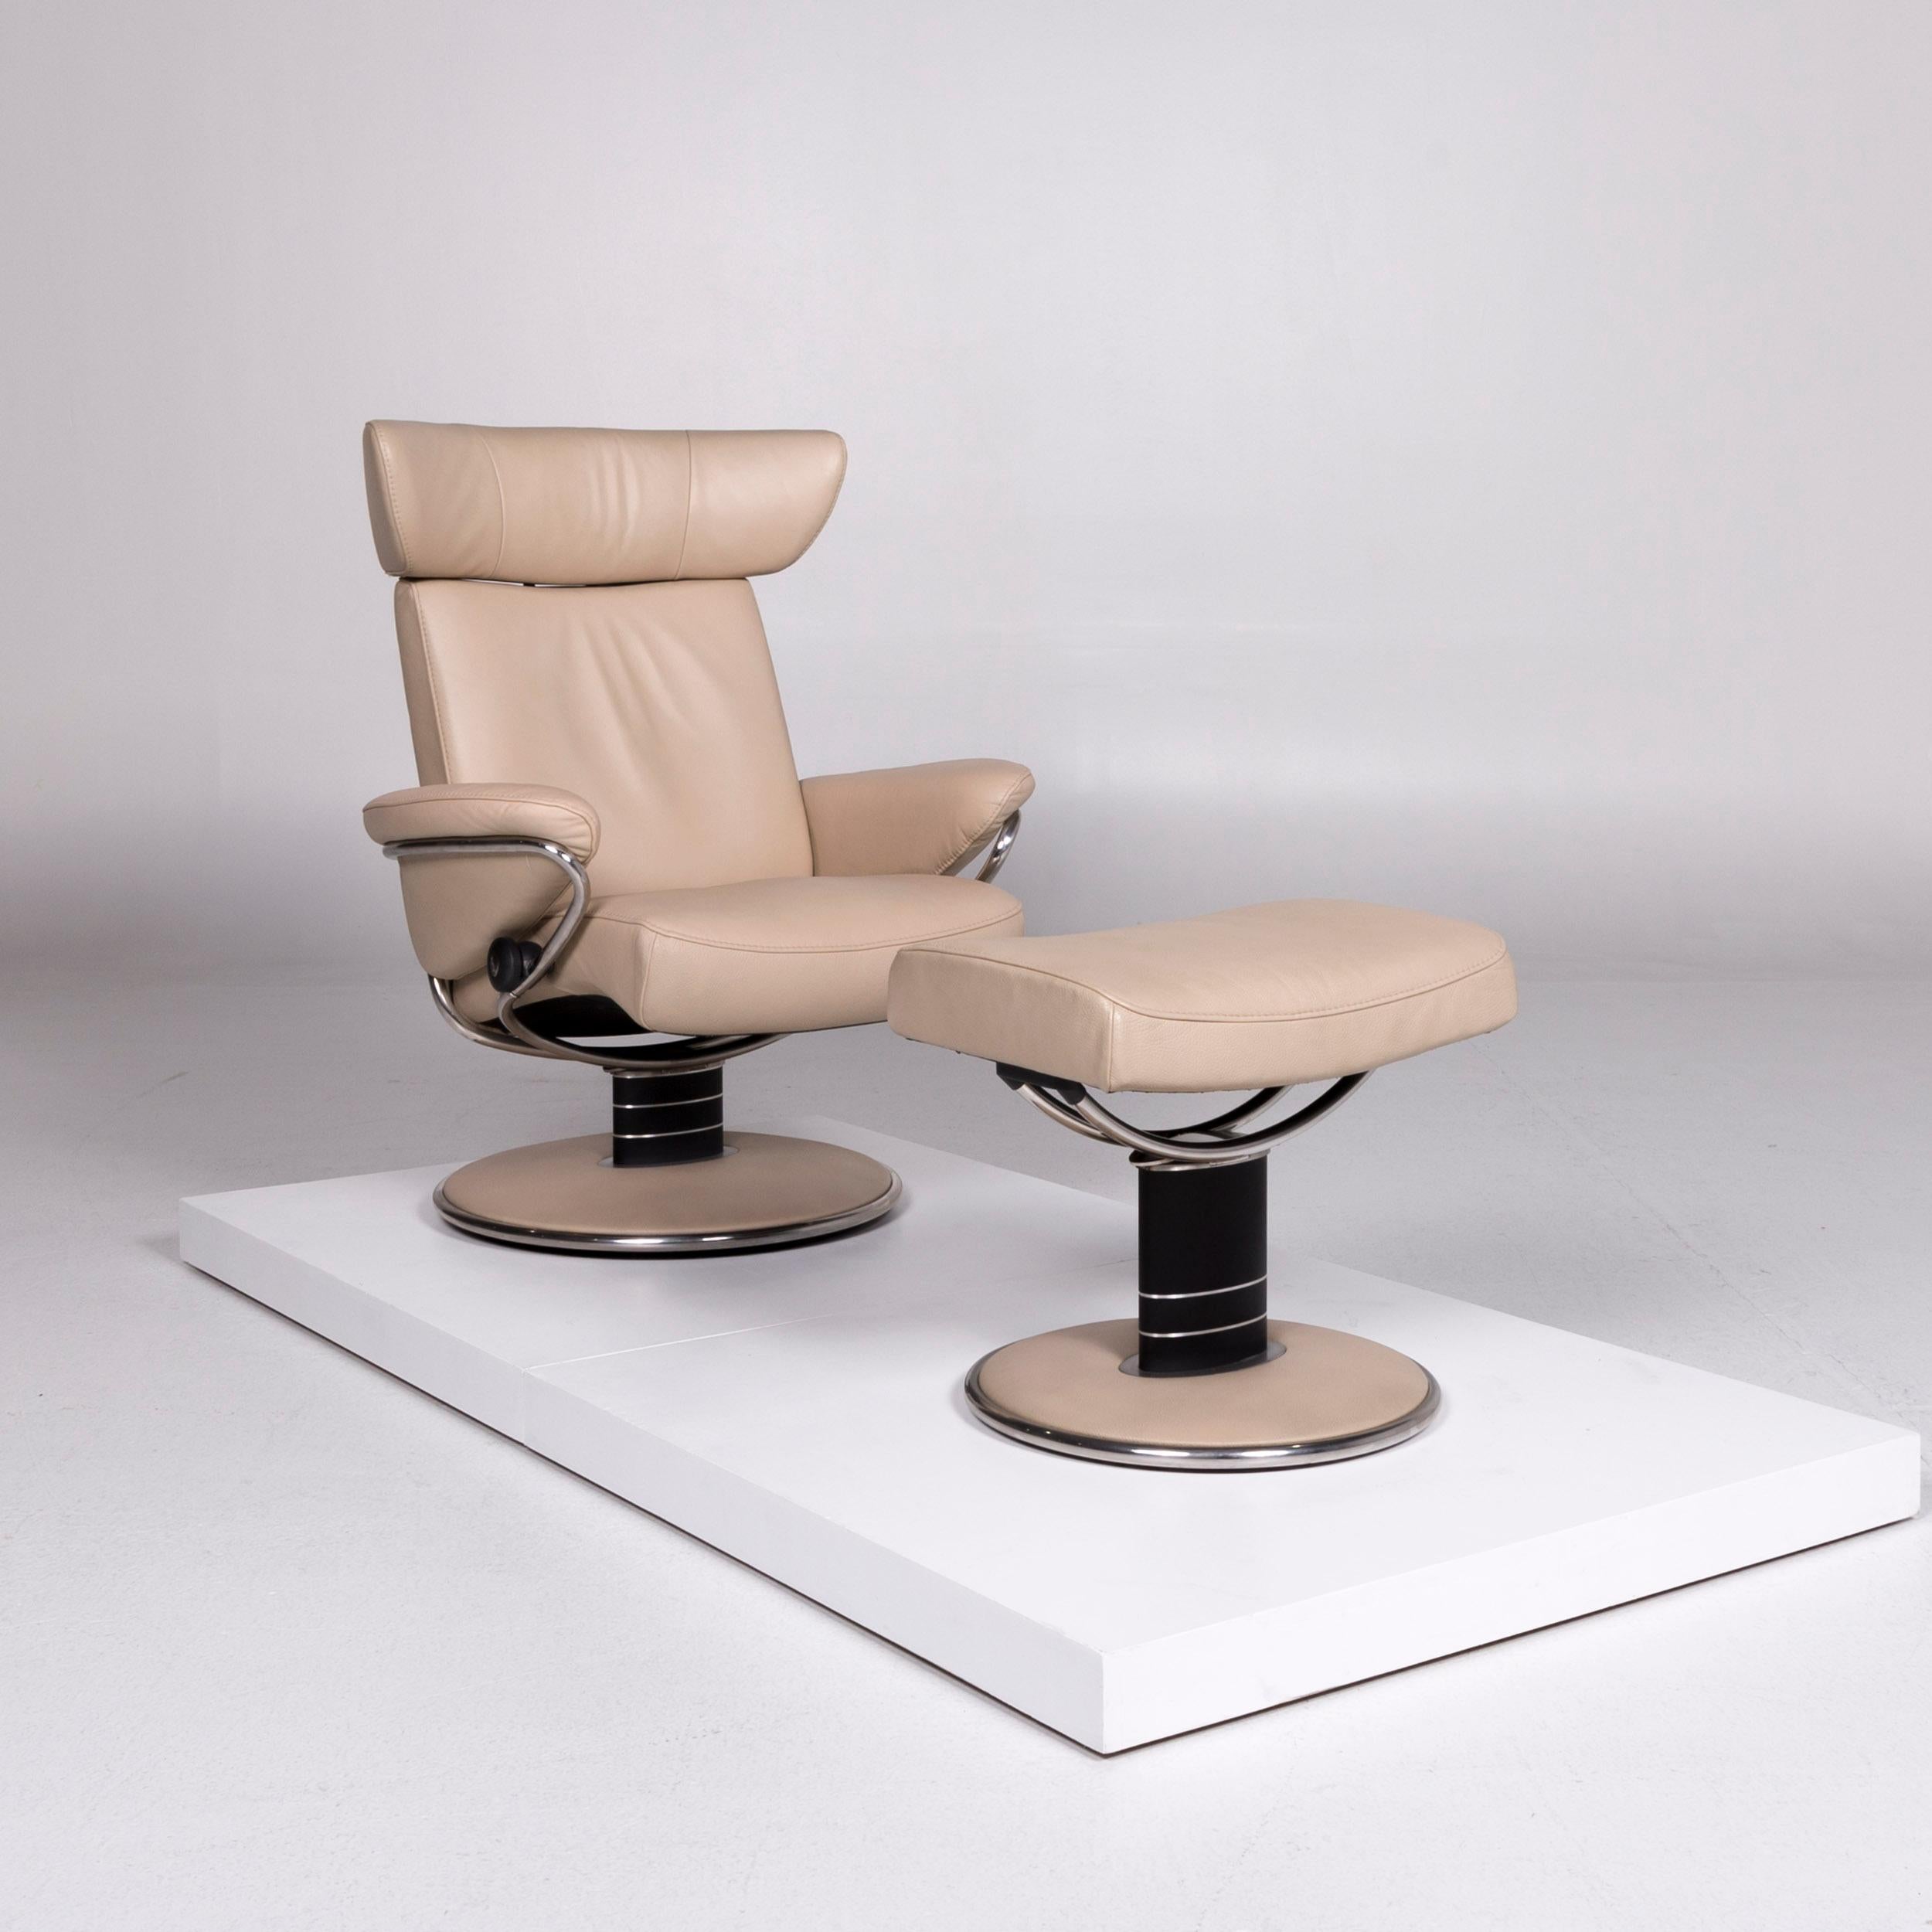 We bring to you a stressless jazz designer leather armchair beige incl. stool.
    
 
 Product measurements in centimeters:
 
 Depth 81
Width 84
Height 101
Seat-height 46
Rest-height 57
Seat-depth 50
Seat-width 55
Back-height 60.